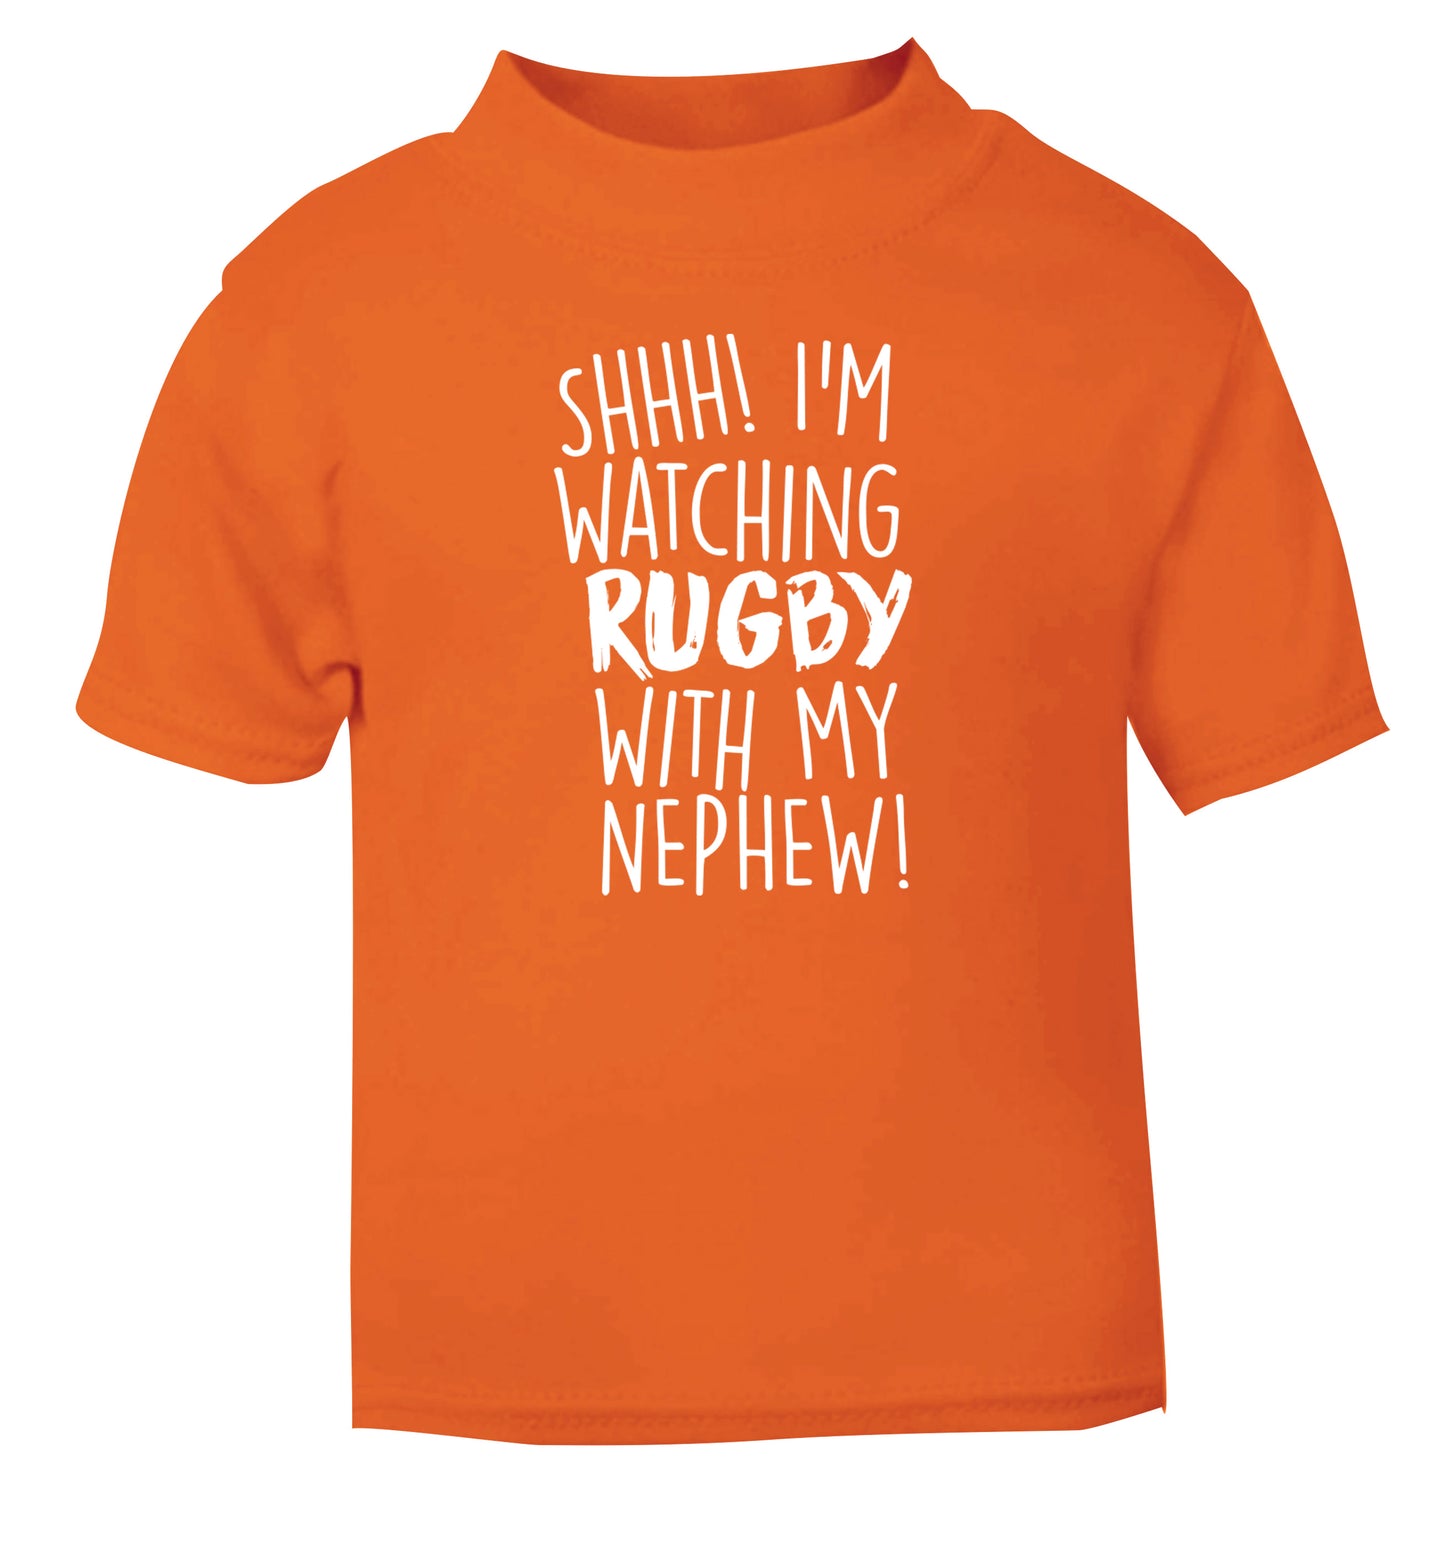 Shh.. I'm watching rugby with my nephew orange Baby Toddler Tshirt 2 Years